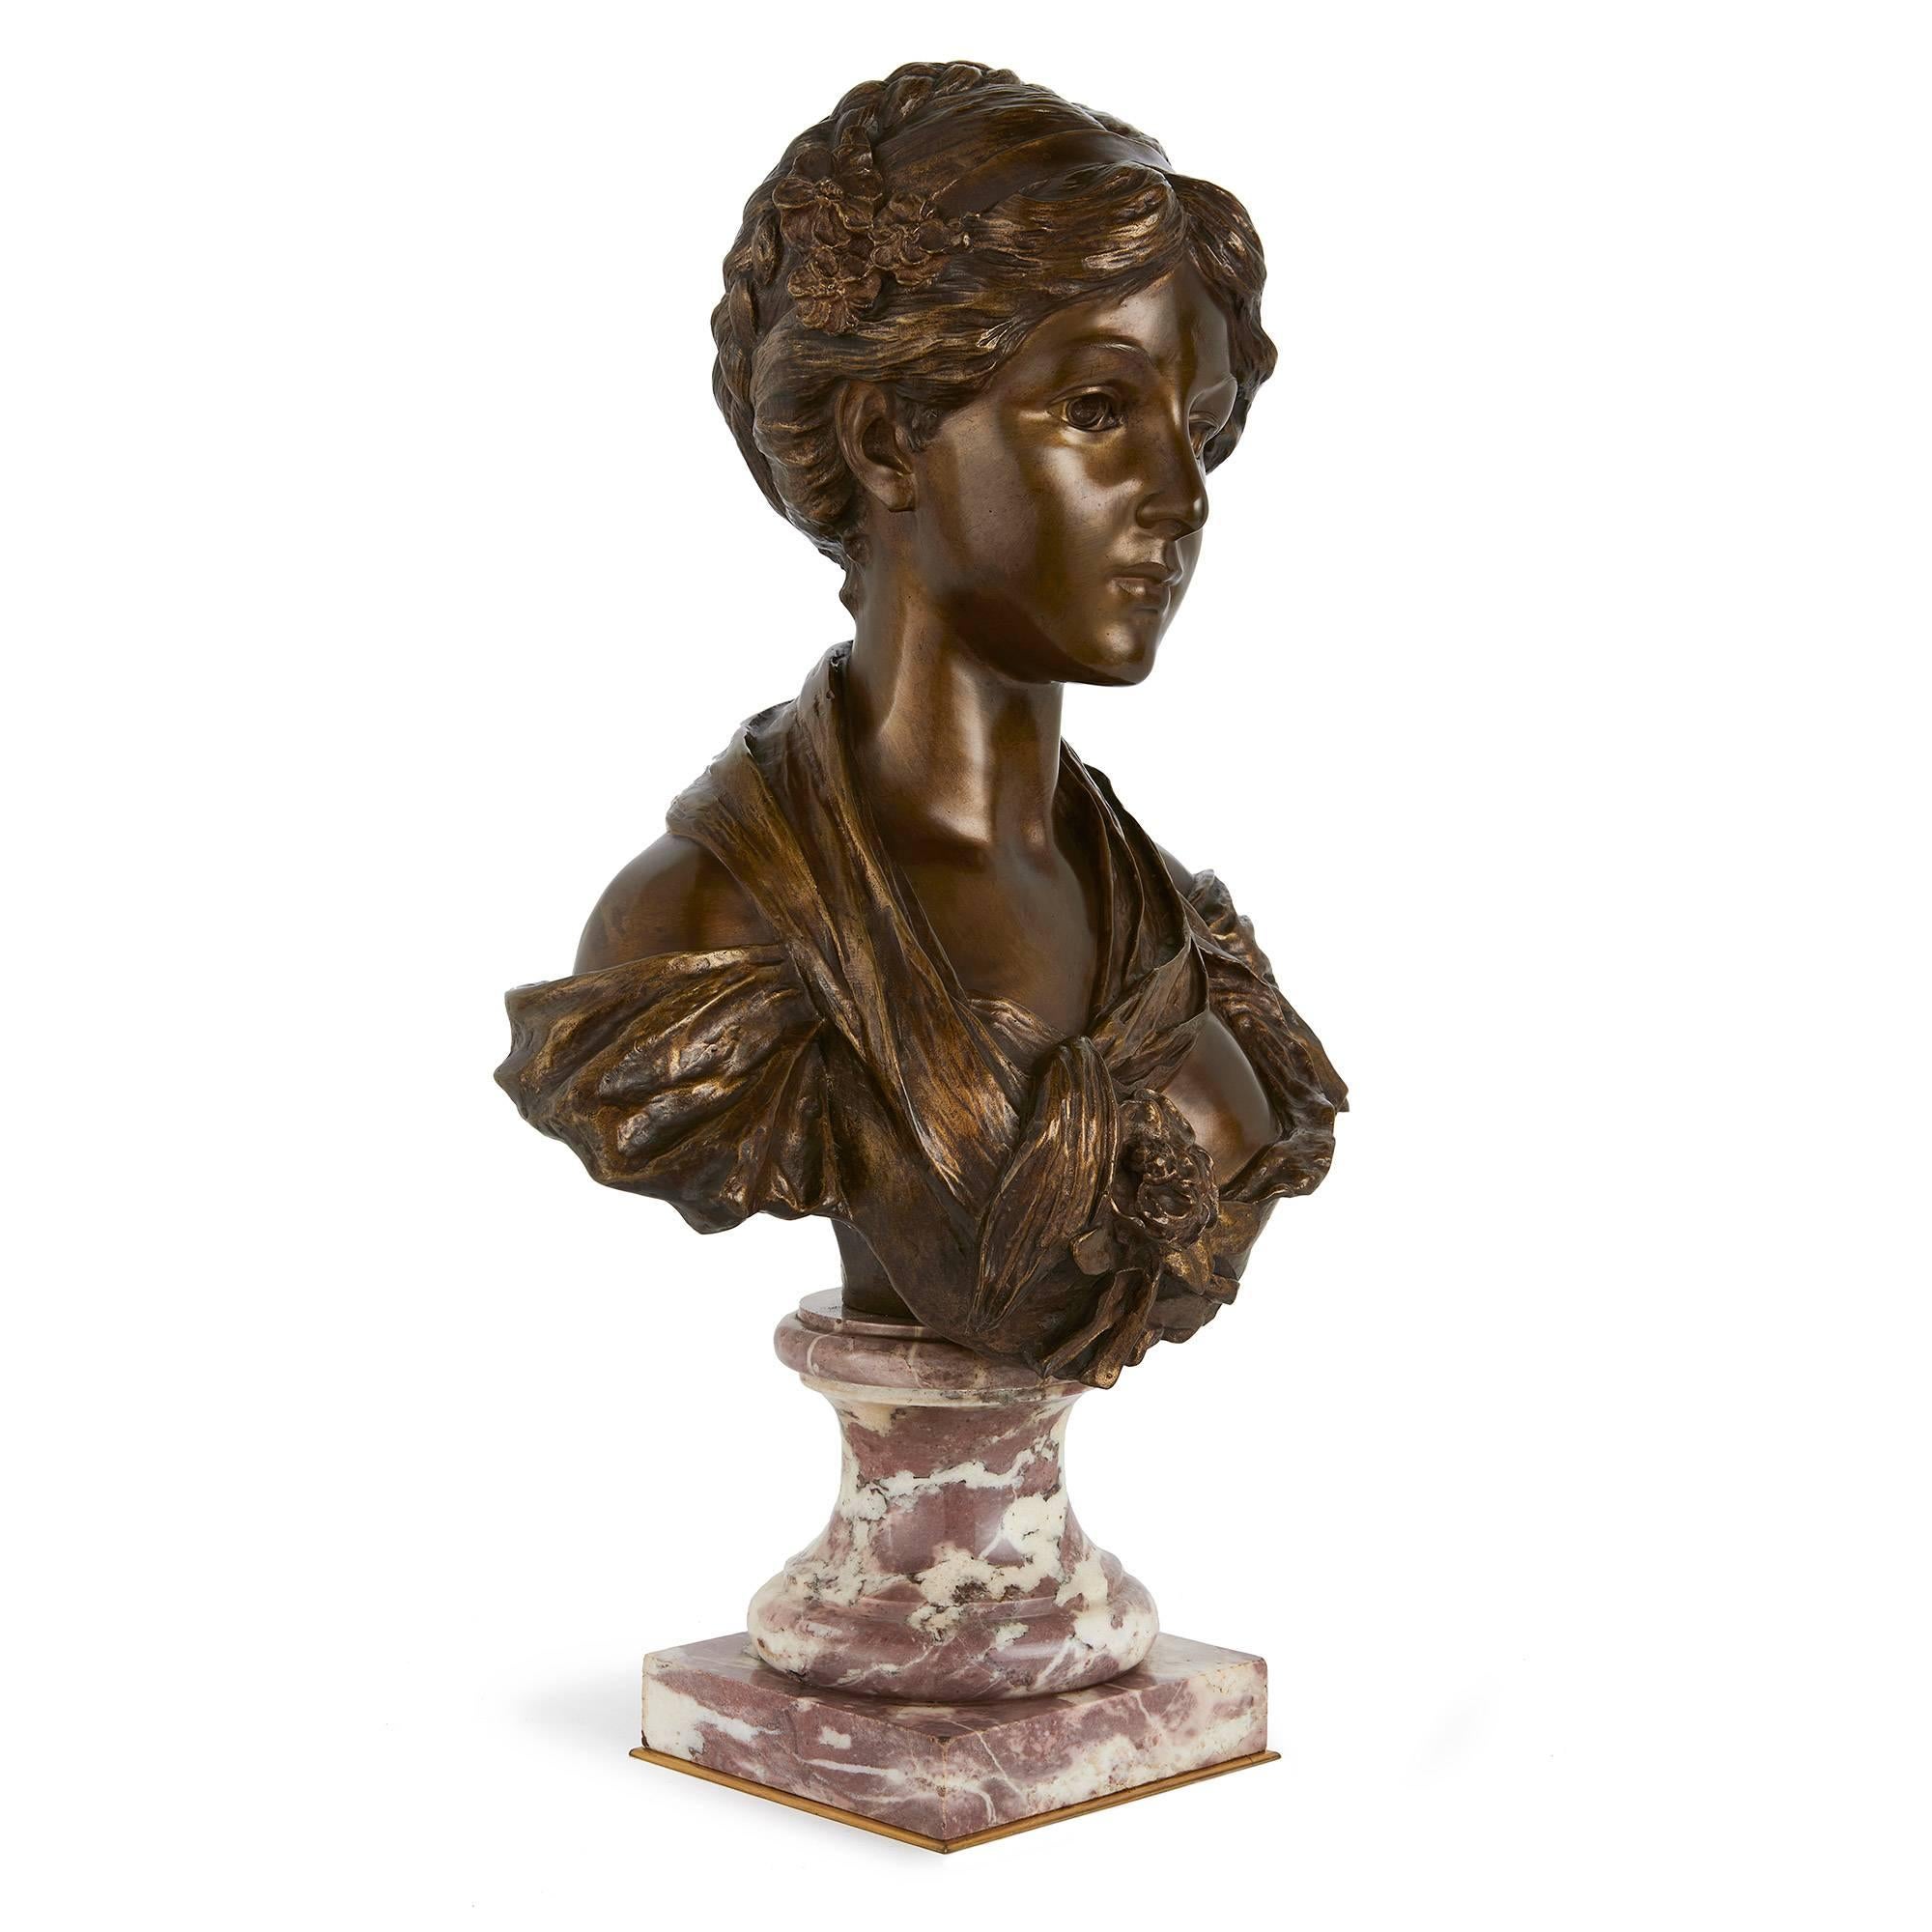 On a veined marble base; after Jean-Baptiste Greuze, inscribed on the reverse 'D'Apres Greuze (Musee Du Louvre)'.

This beautiful patinated bronze bust depicts an elegant young lady, who gazes out at the viewer with a serene look that creates an